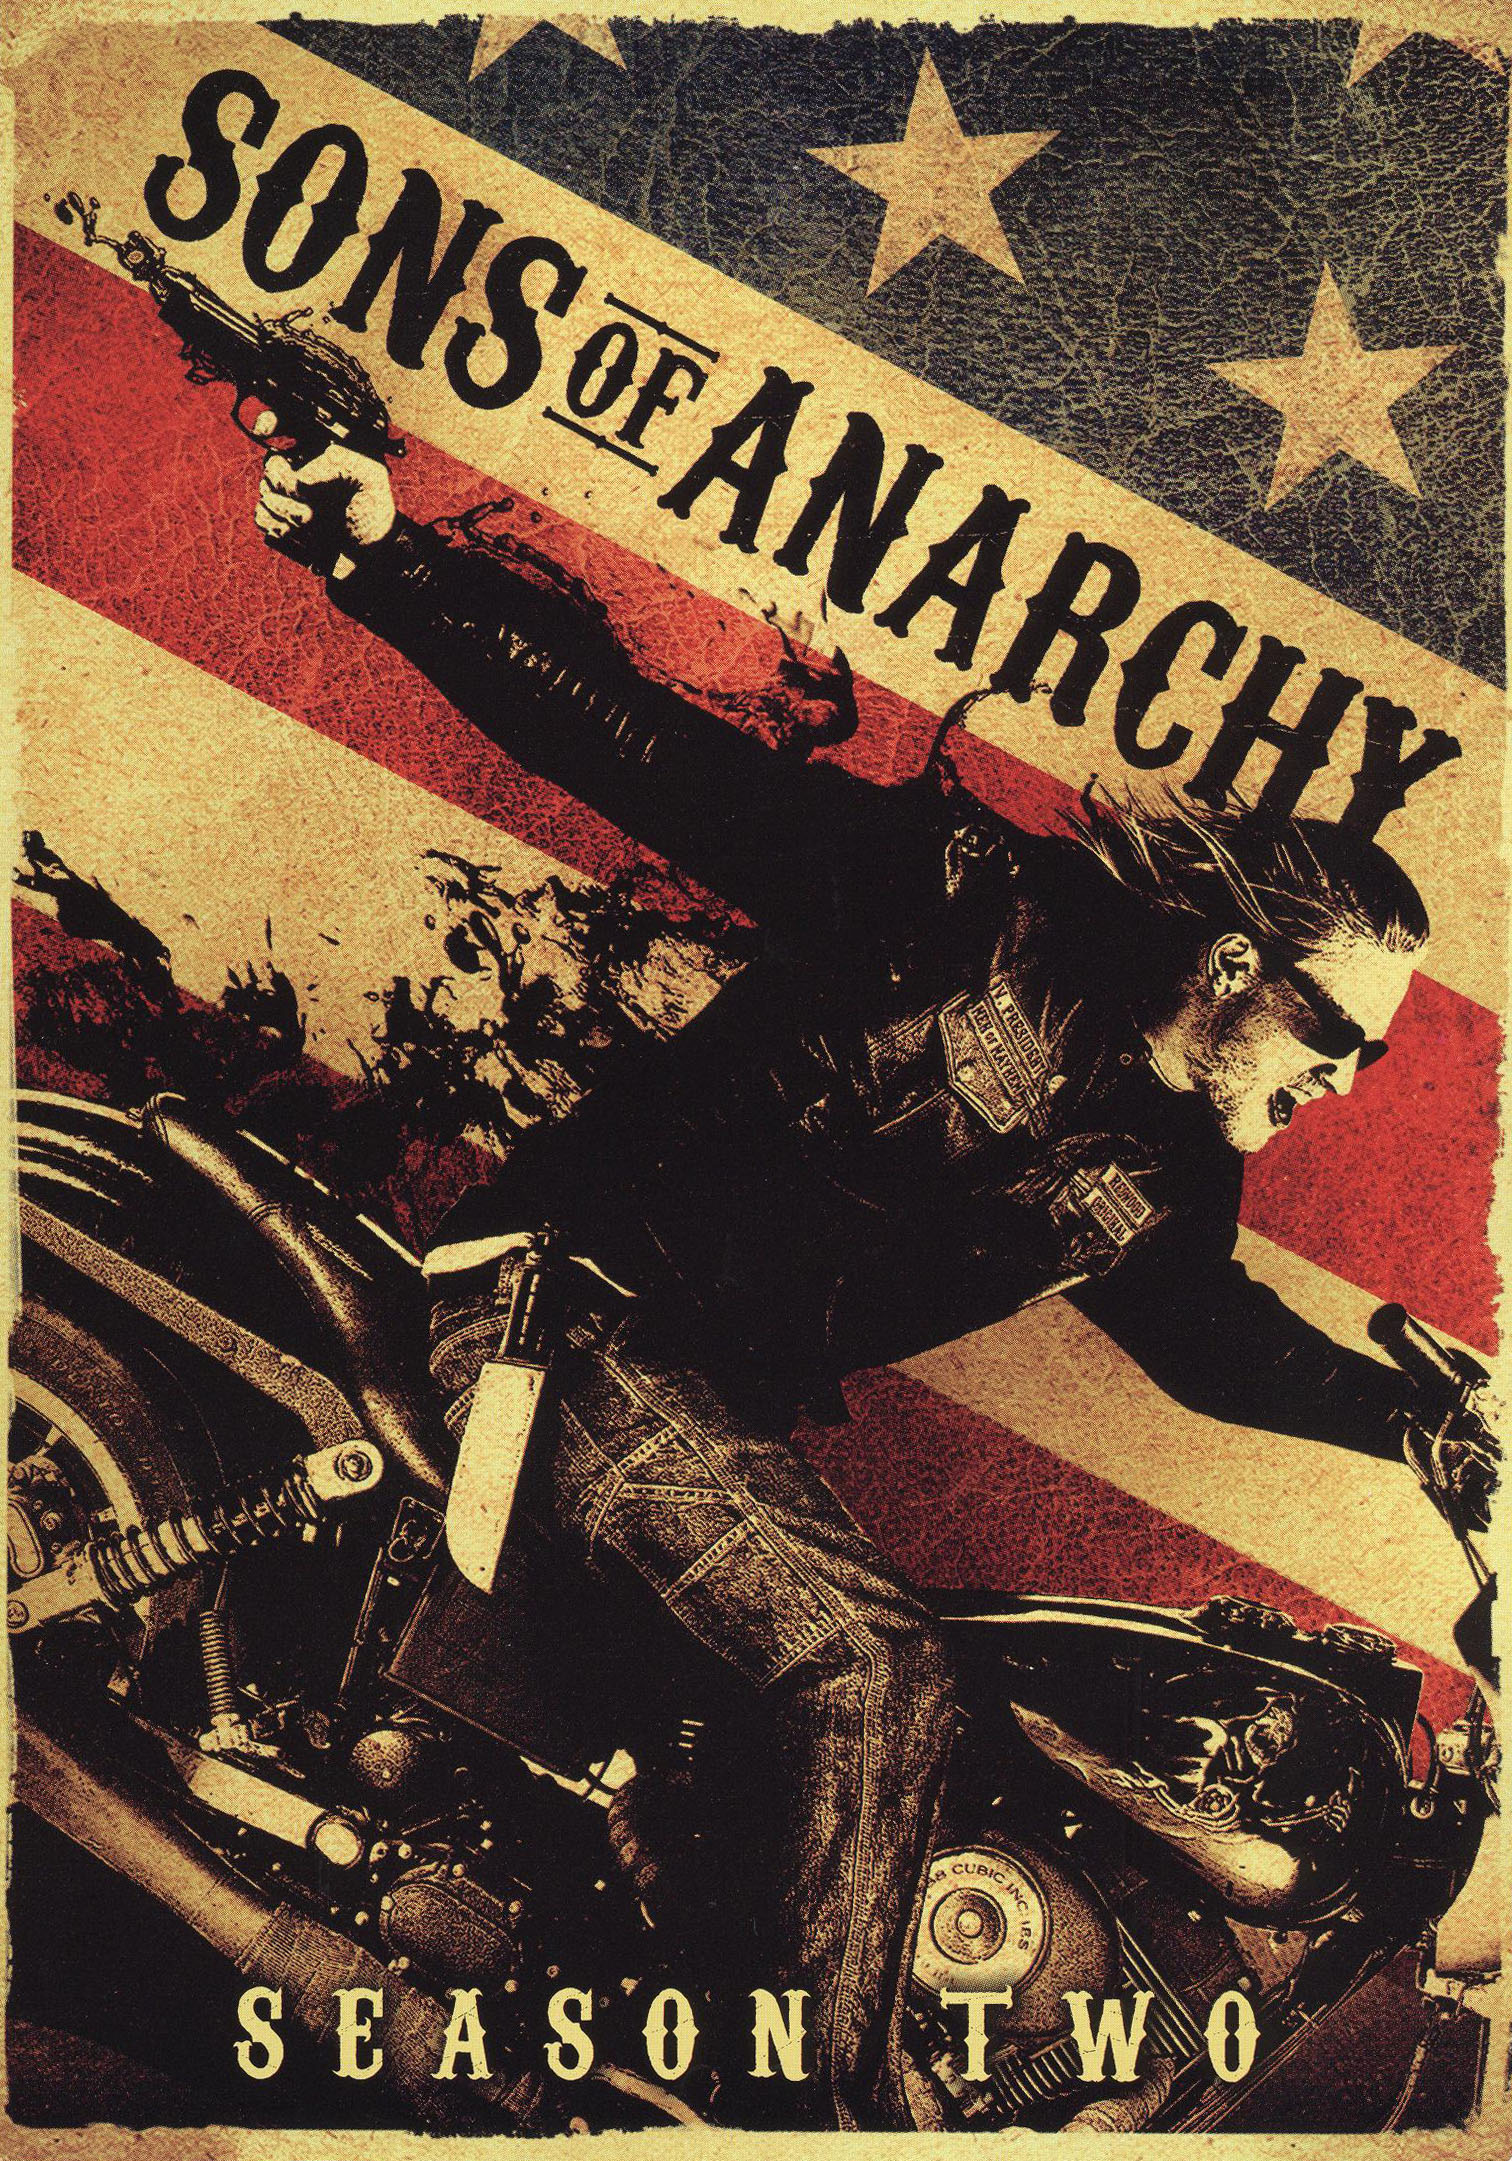 Sons of Anarchy: Season Two [4 Discs] [DVD]